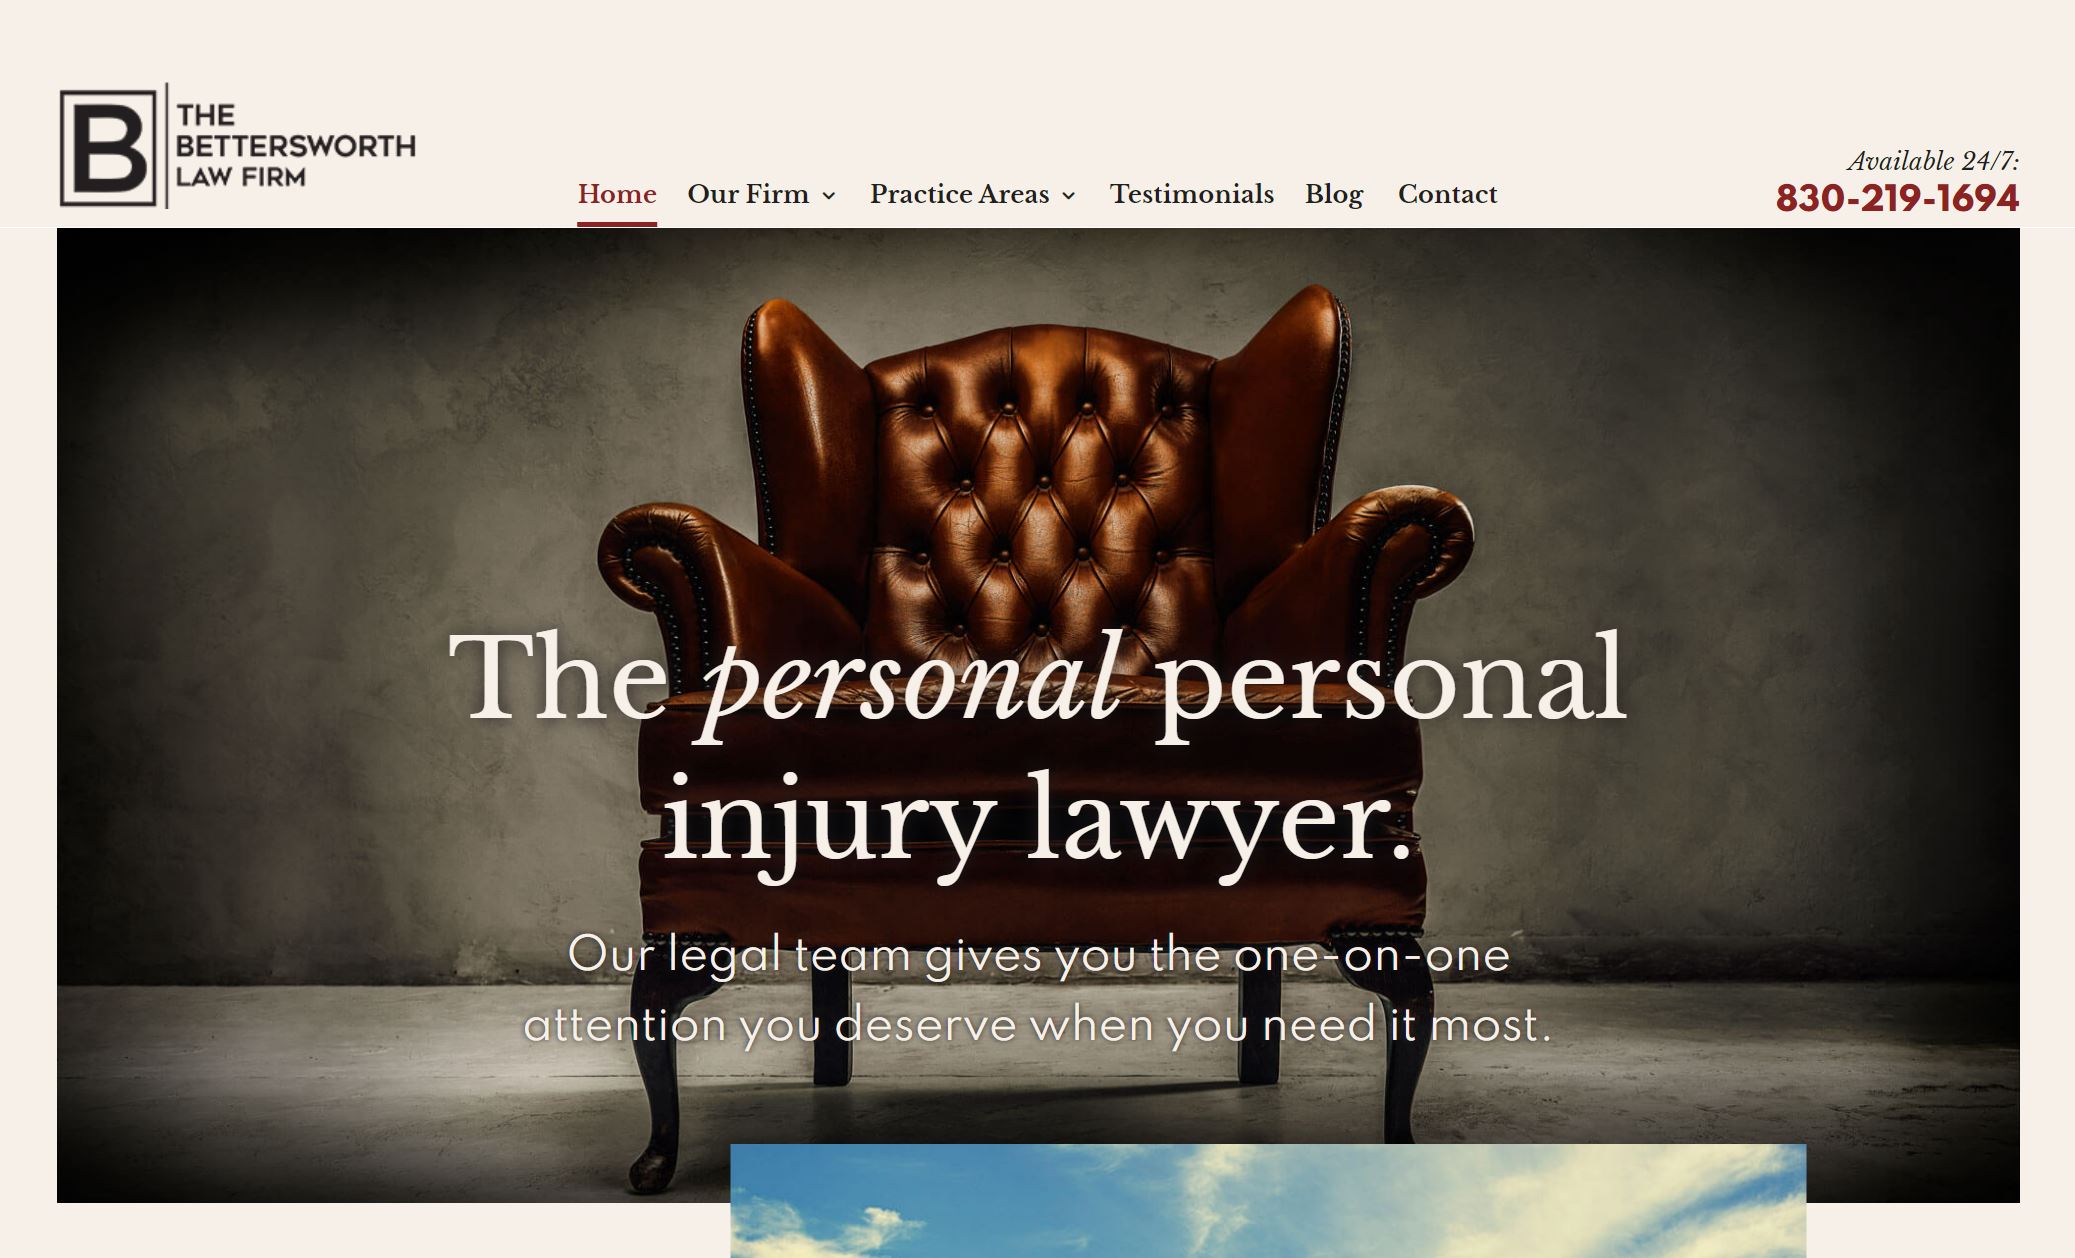 The Bettersworth Law Firm websites for personal injury lawyers